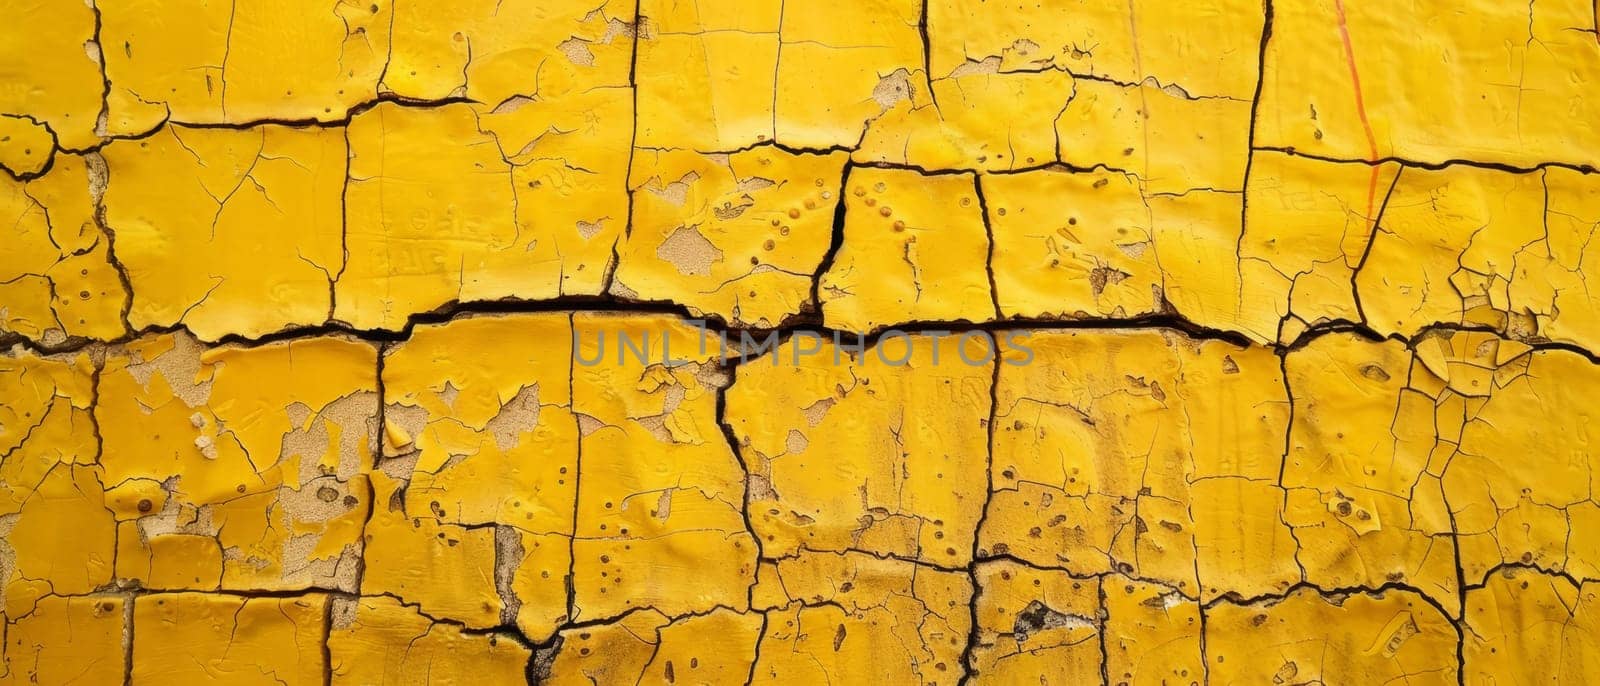 Layers of yellow paint crack and peel away, revealing the raw texture of the wall beneath. The image evokes a sense of history and change